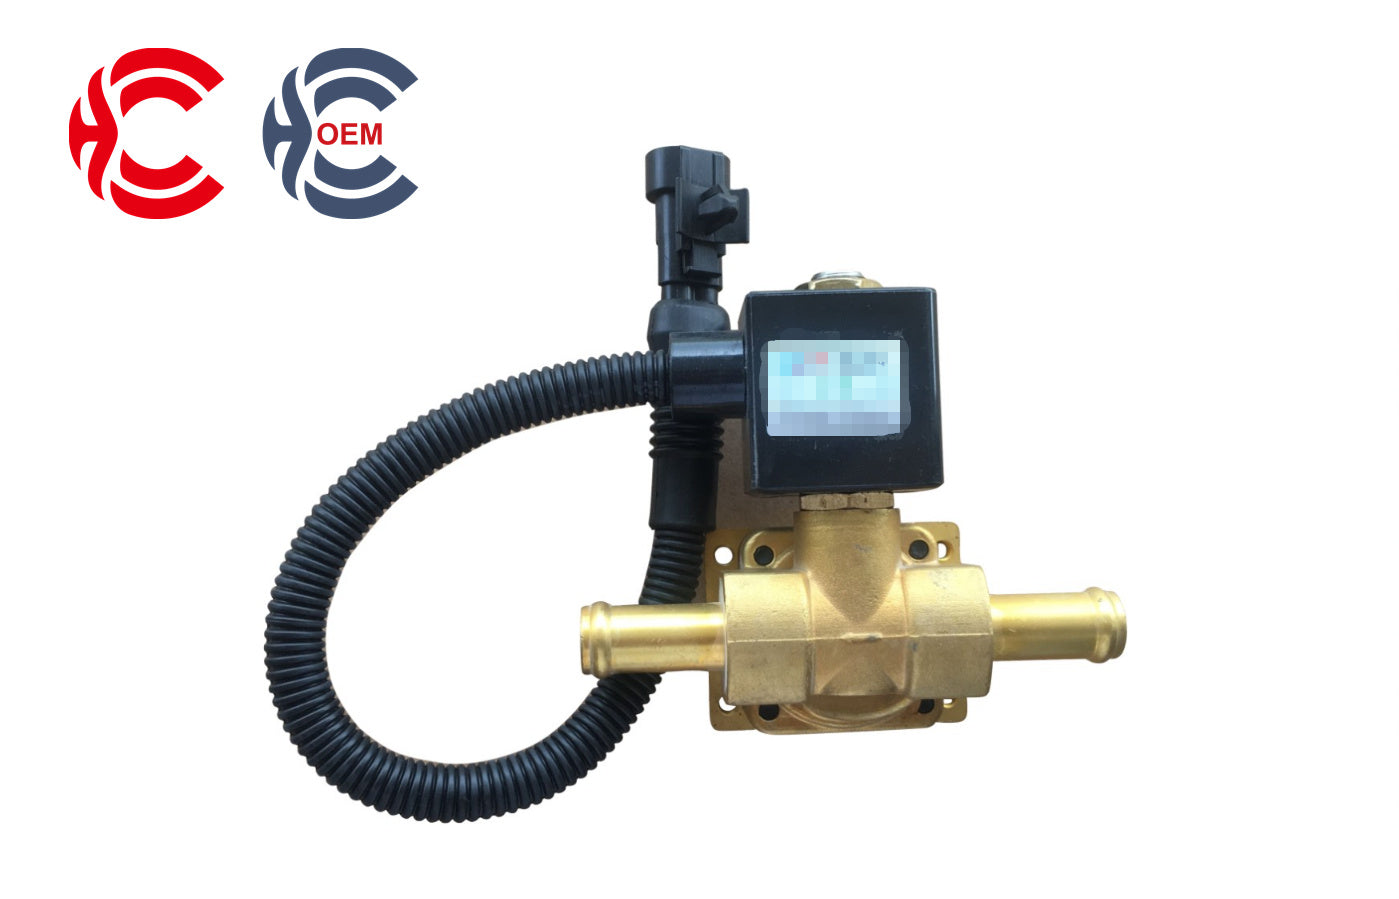 OEM: HUALING D Adblue/Urea Heating Solenoid ValveMaterial: ABS MetalColor: blackOrigin: Made in ChinaWeight: 200gPacking List: 1* Urea Heating Solenoid Valve More ServiceWe can provide OEM Manufacturing serviceWe can Be your one-step solution for Auto PartsWe can provide technical scheme for you Feel Free to Contact Us, We will get back to you as soon as possible.